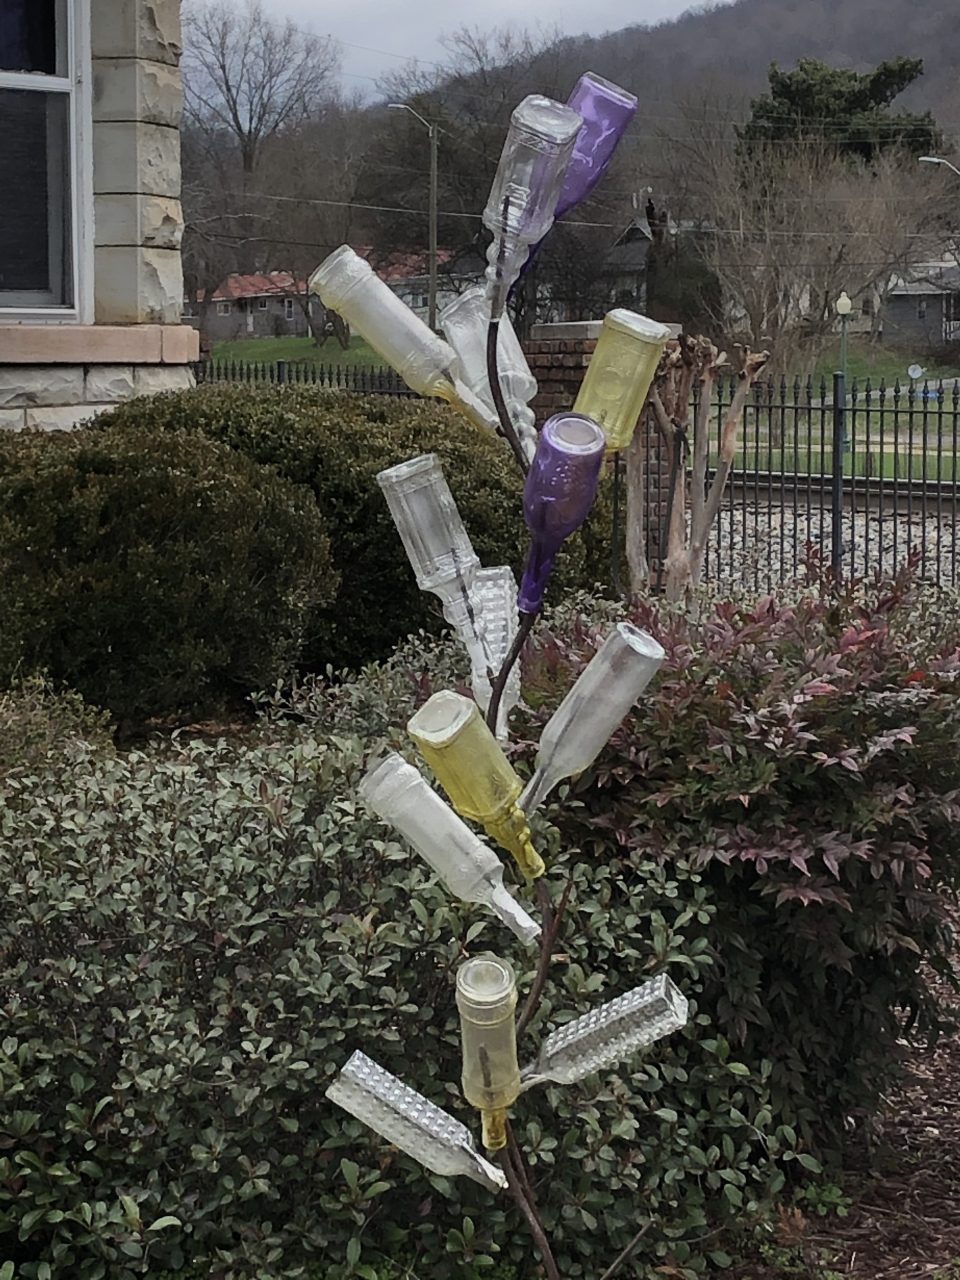 A bottle tree, a practice brought with enslaved people from Africa and introduced originally in the Carolina Low Country. Bottle trees were used to capture haints, evil spirits from the beliefs of the Gullah-Geechee culture. This bottle tree was outside a small railroad museum in Ft. Payne, Alabama.